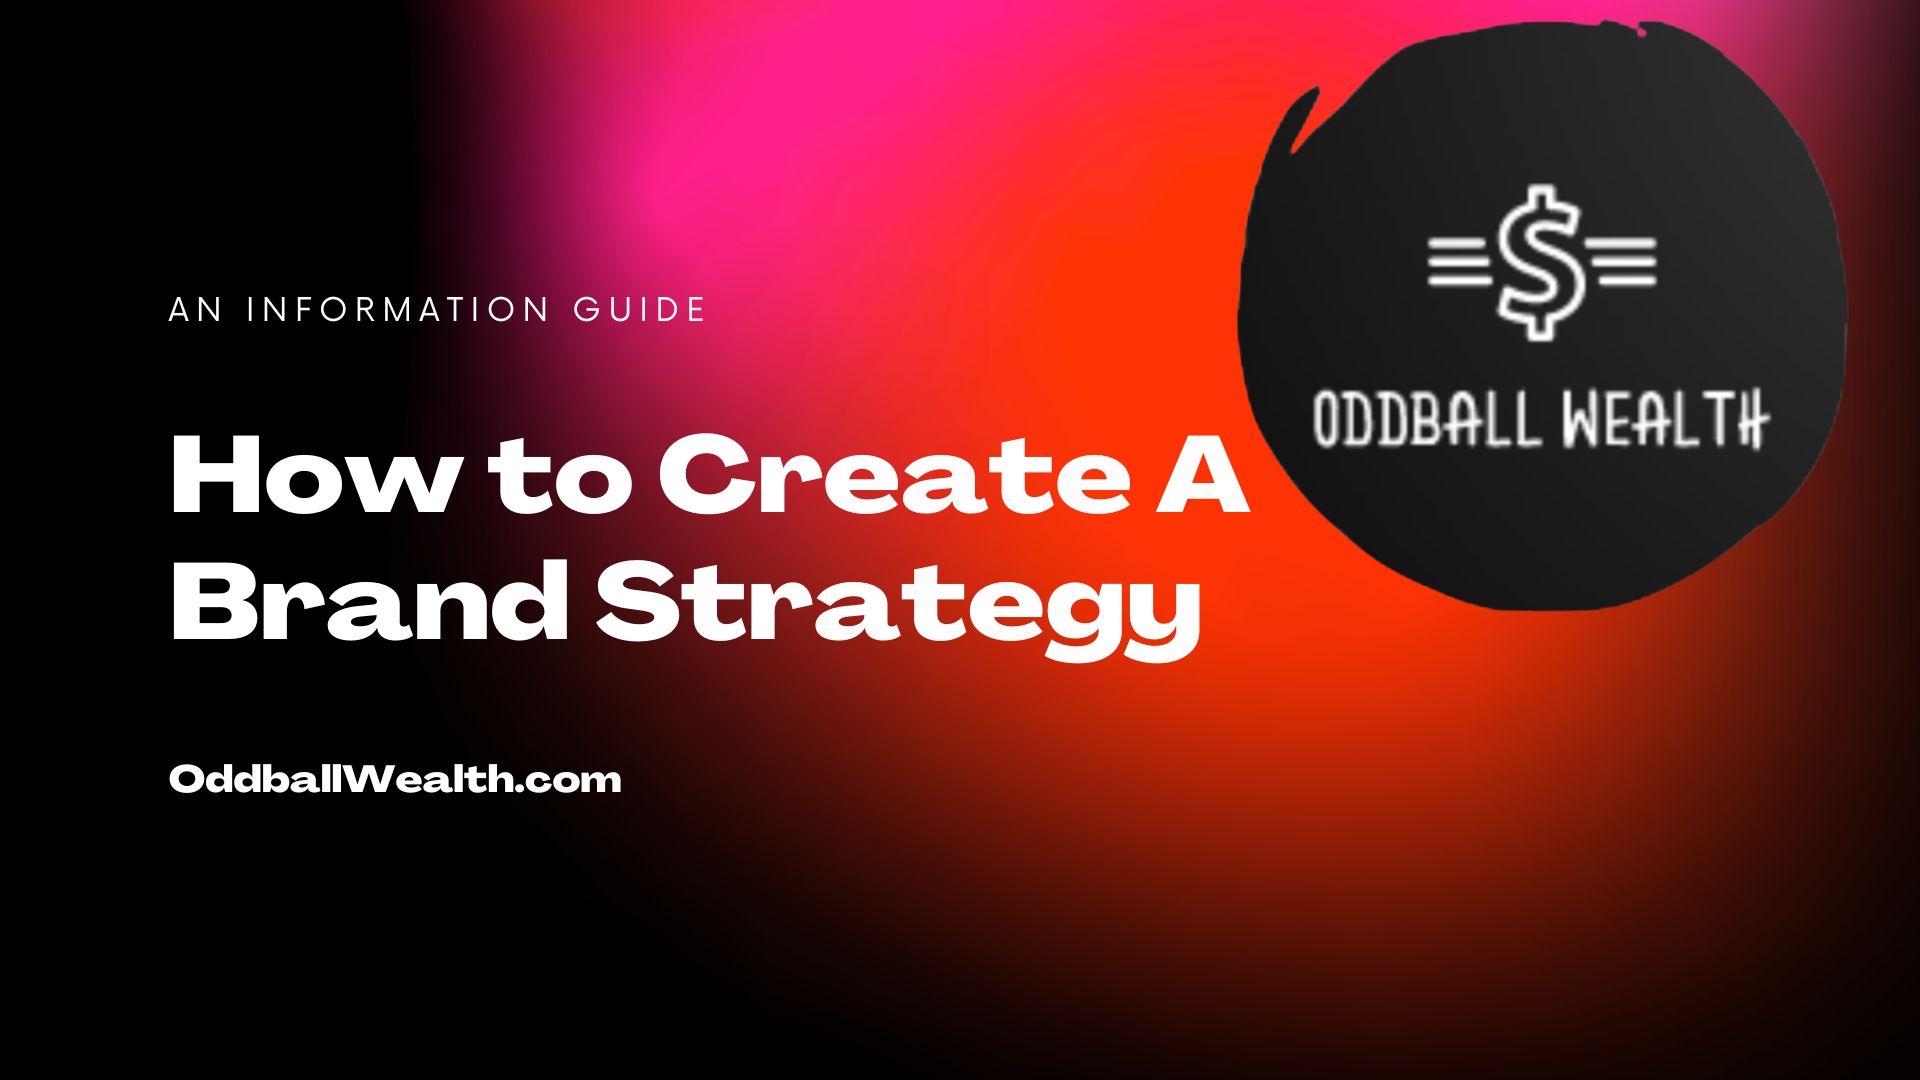 Brand Strategy Guide: How to Create a Brand Strategy